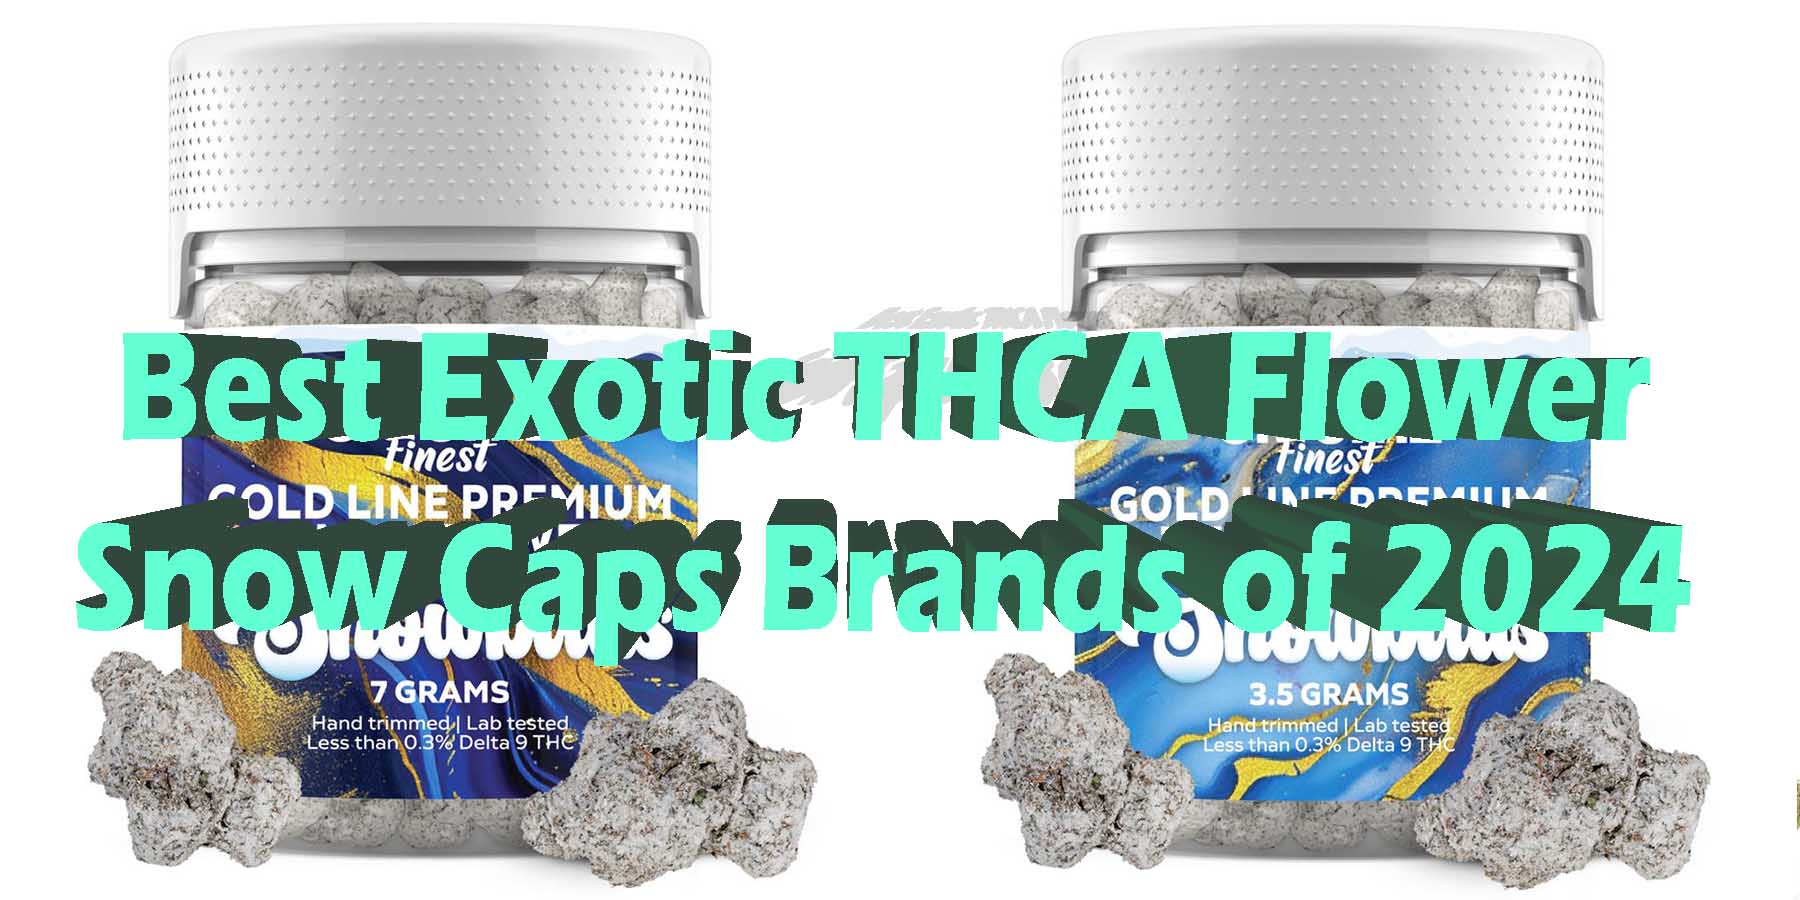 Best Exotic THCA Flower Snow Caps Brands of 2024 Coupon Discount For Smoking Best High Smoke THCA THC Cannabinoids Shop Online Bloomz